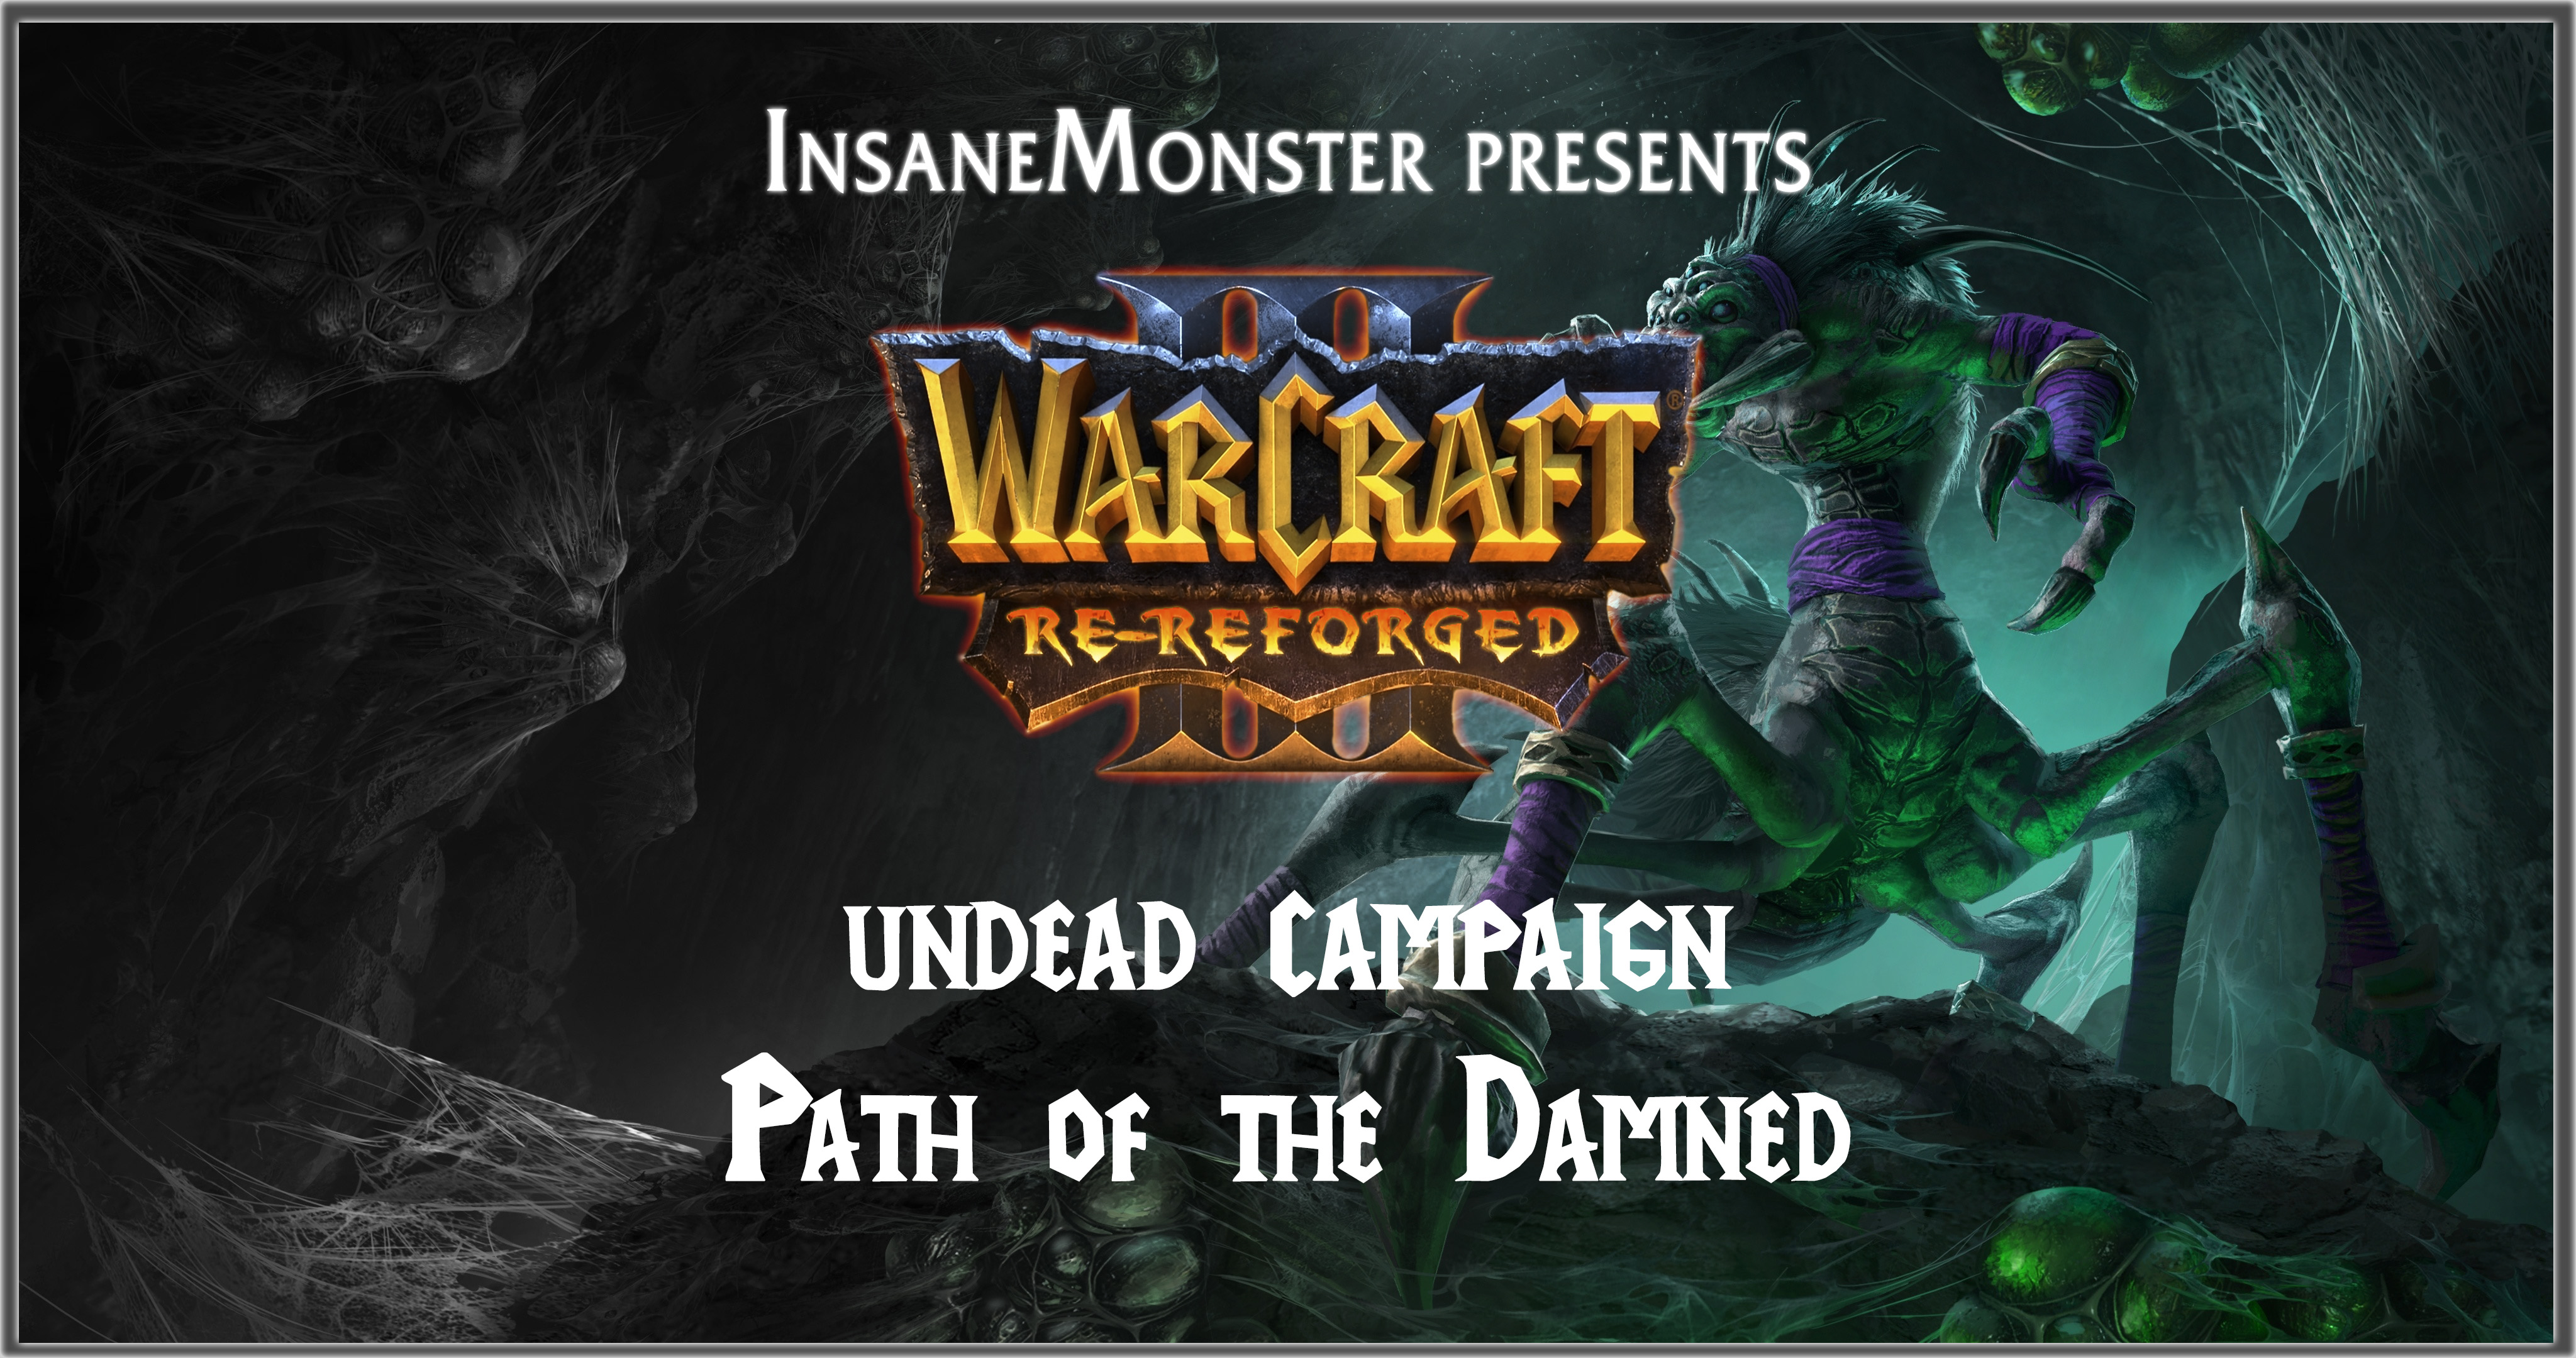 Warcraft 3 Re-Reforged Undead Campaign Logo Bordered